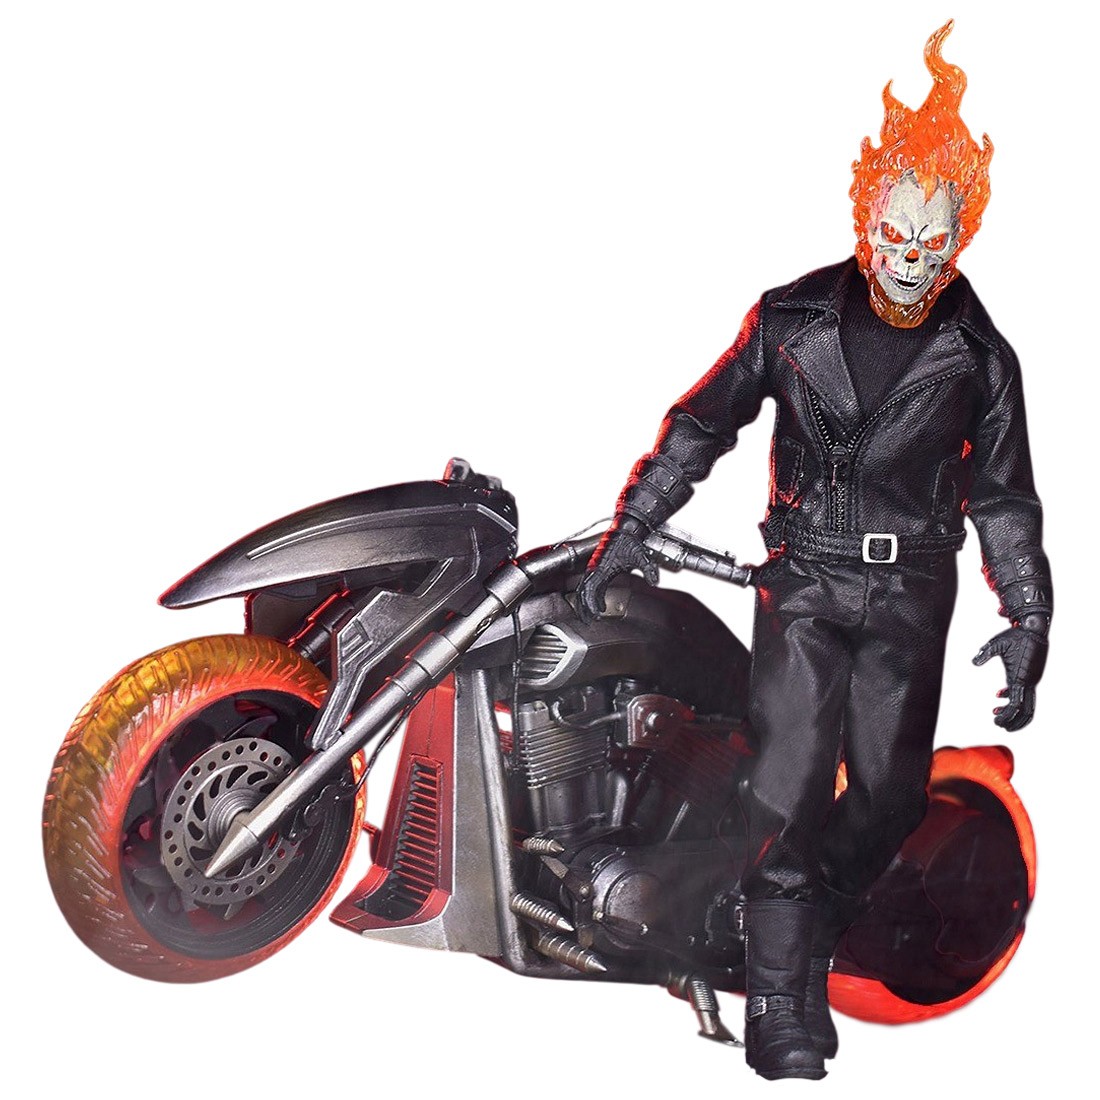 Mezco Toys One-12 Collective Ghost Rider And Hell Cycle Action Figure Set (black)